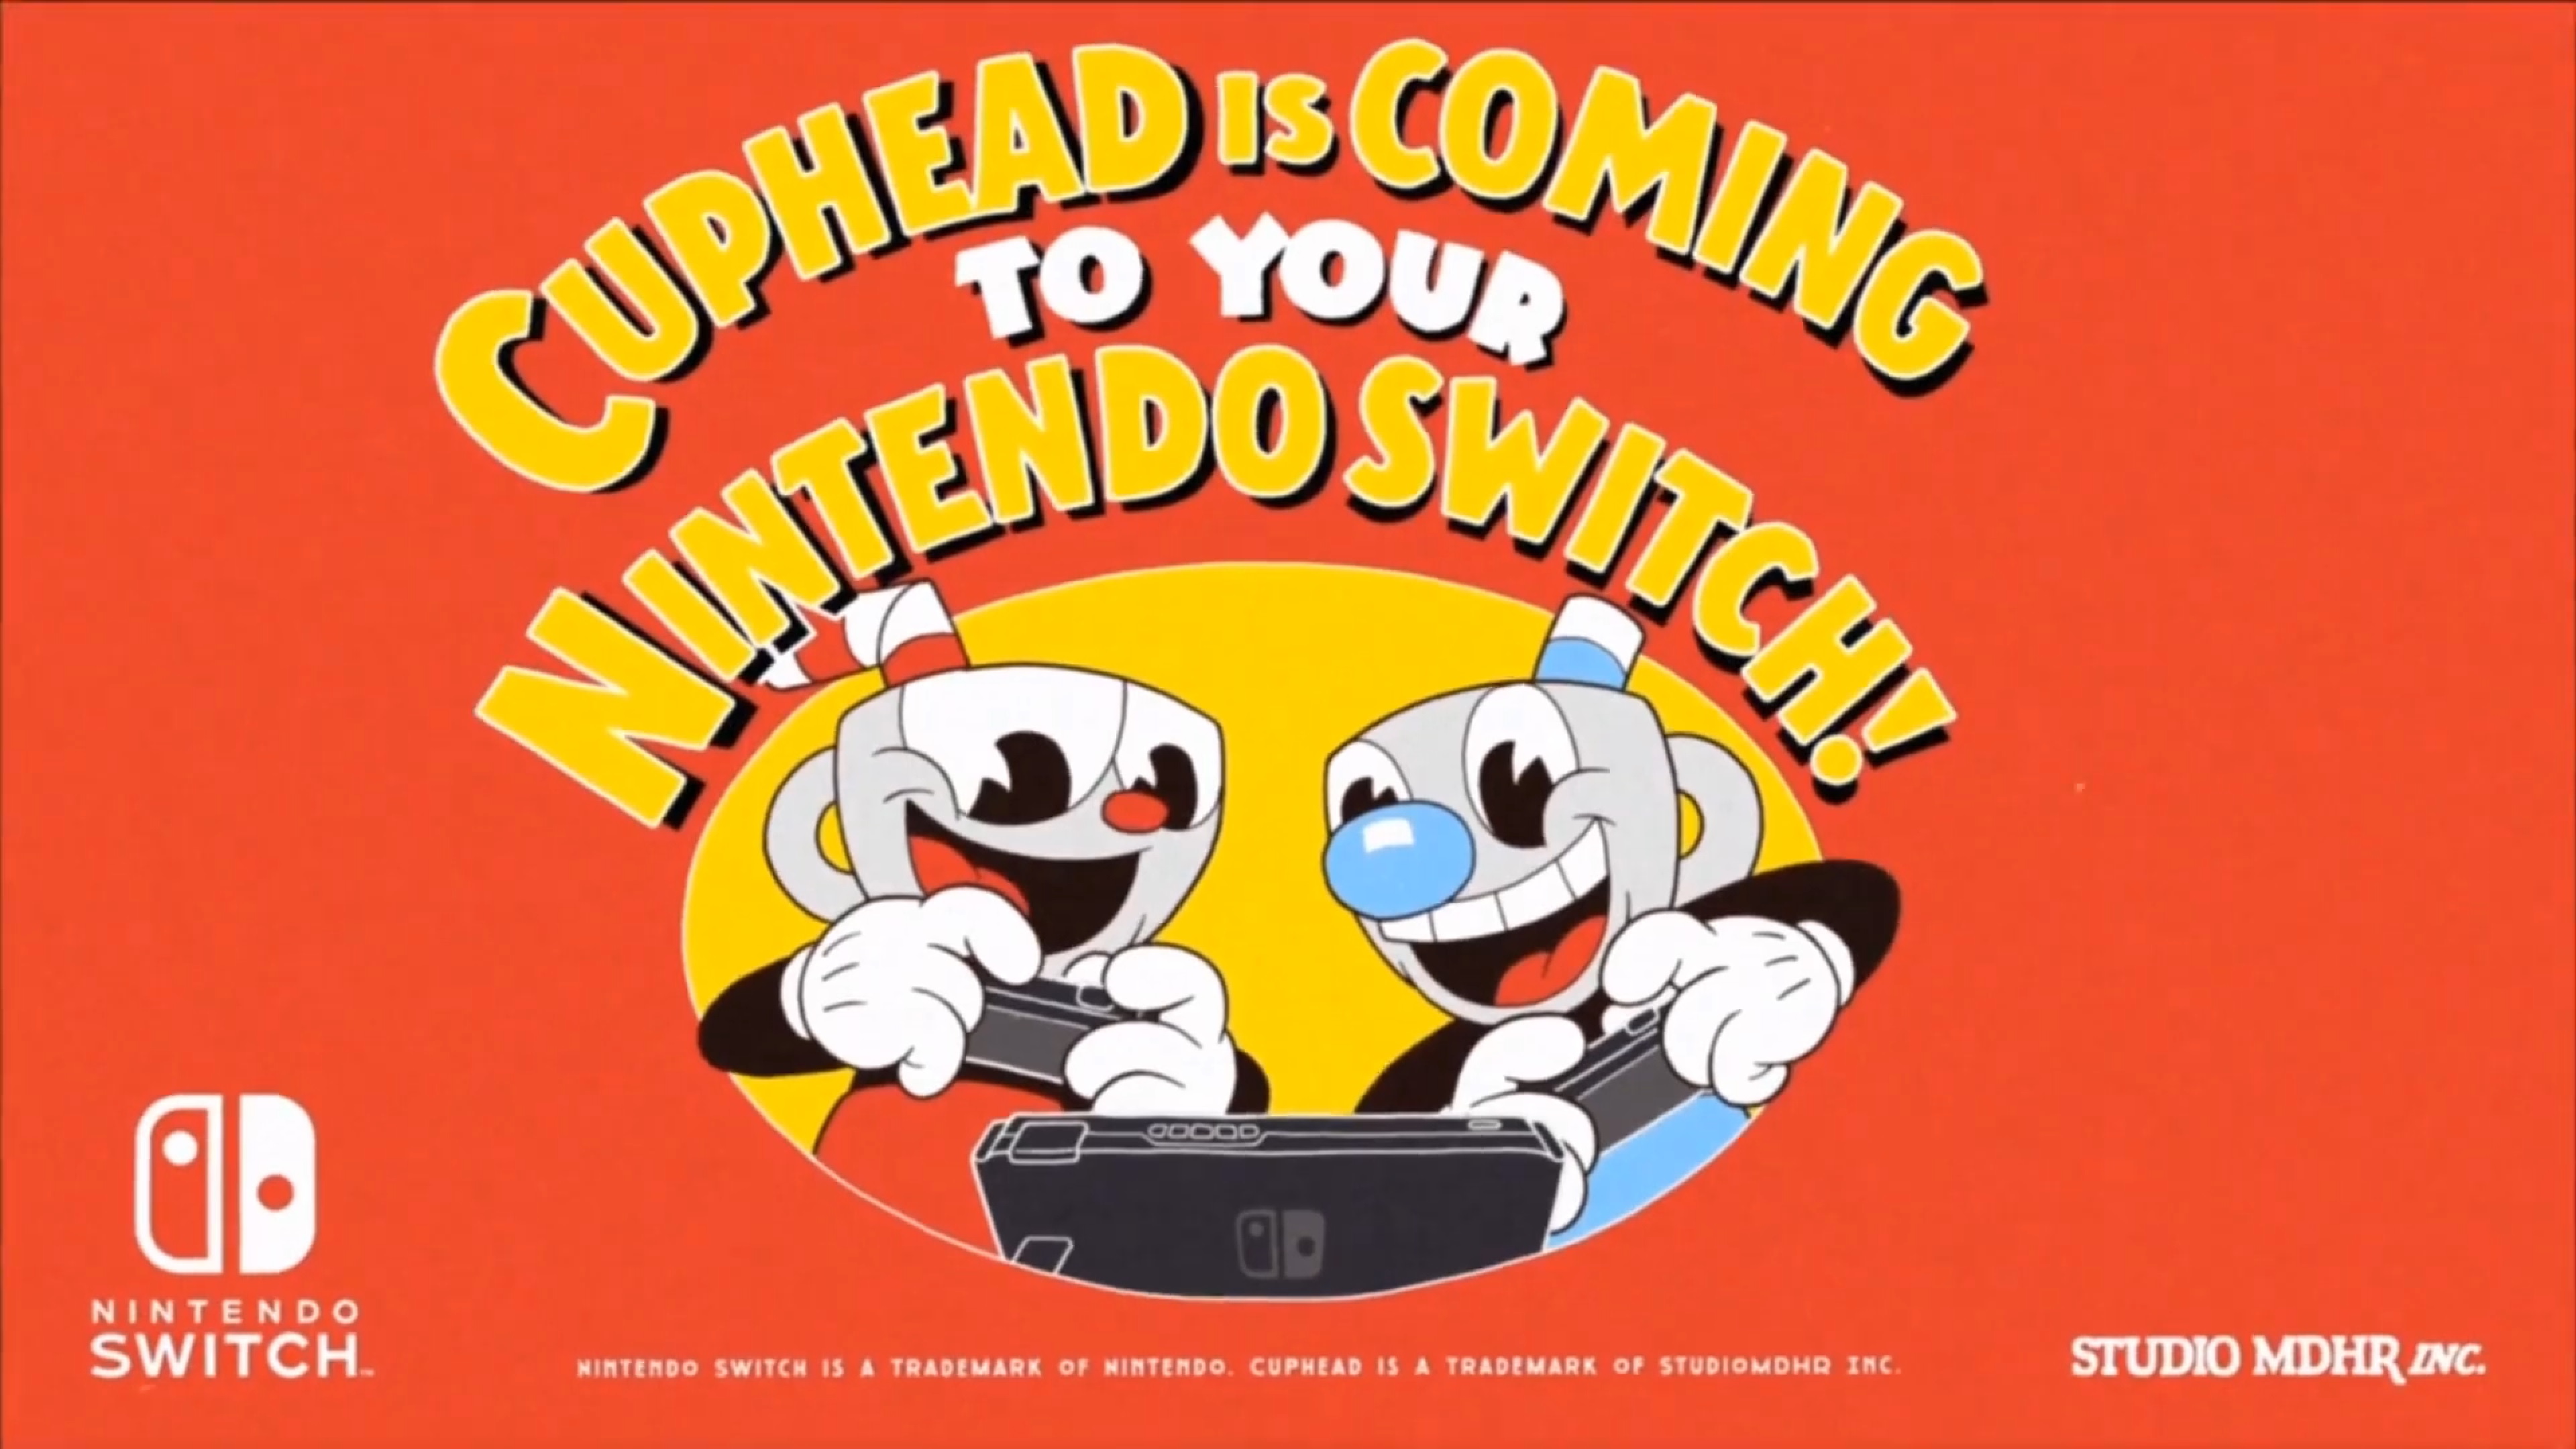 cuphead free giveaway